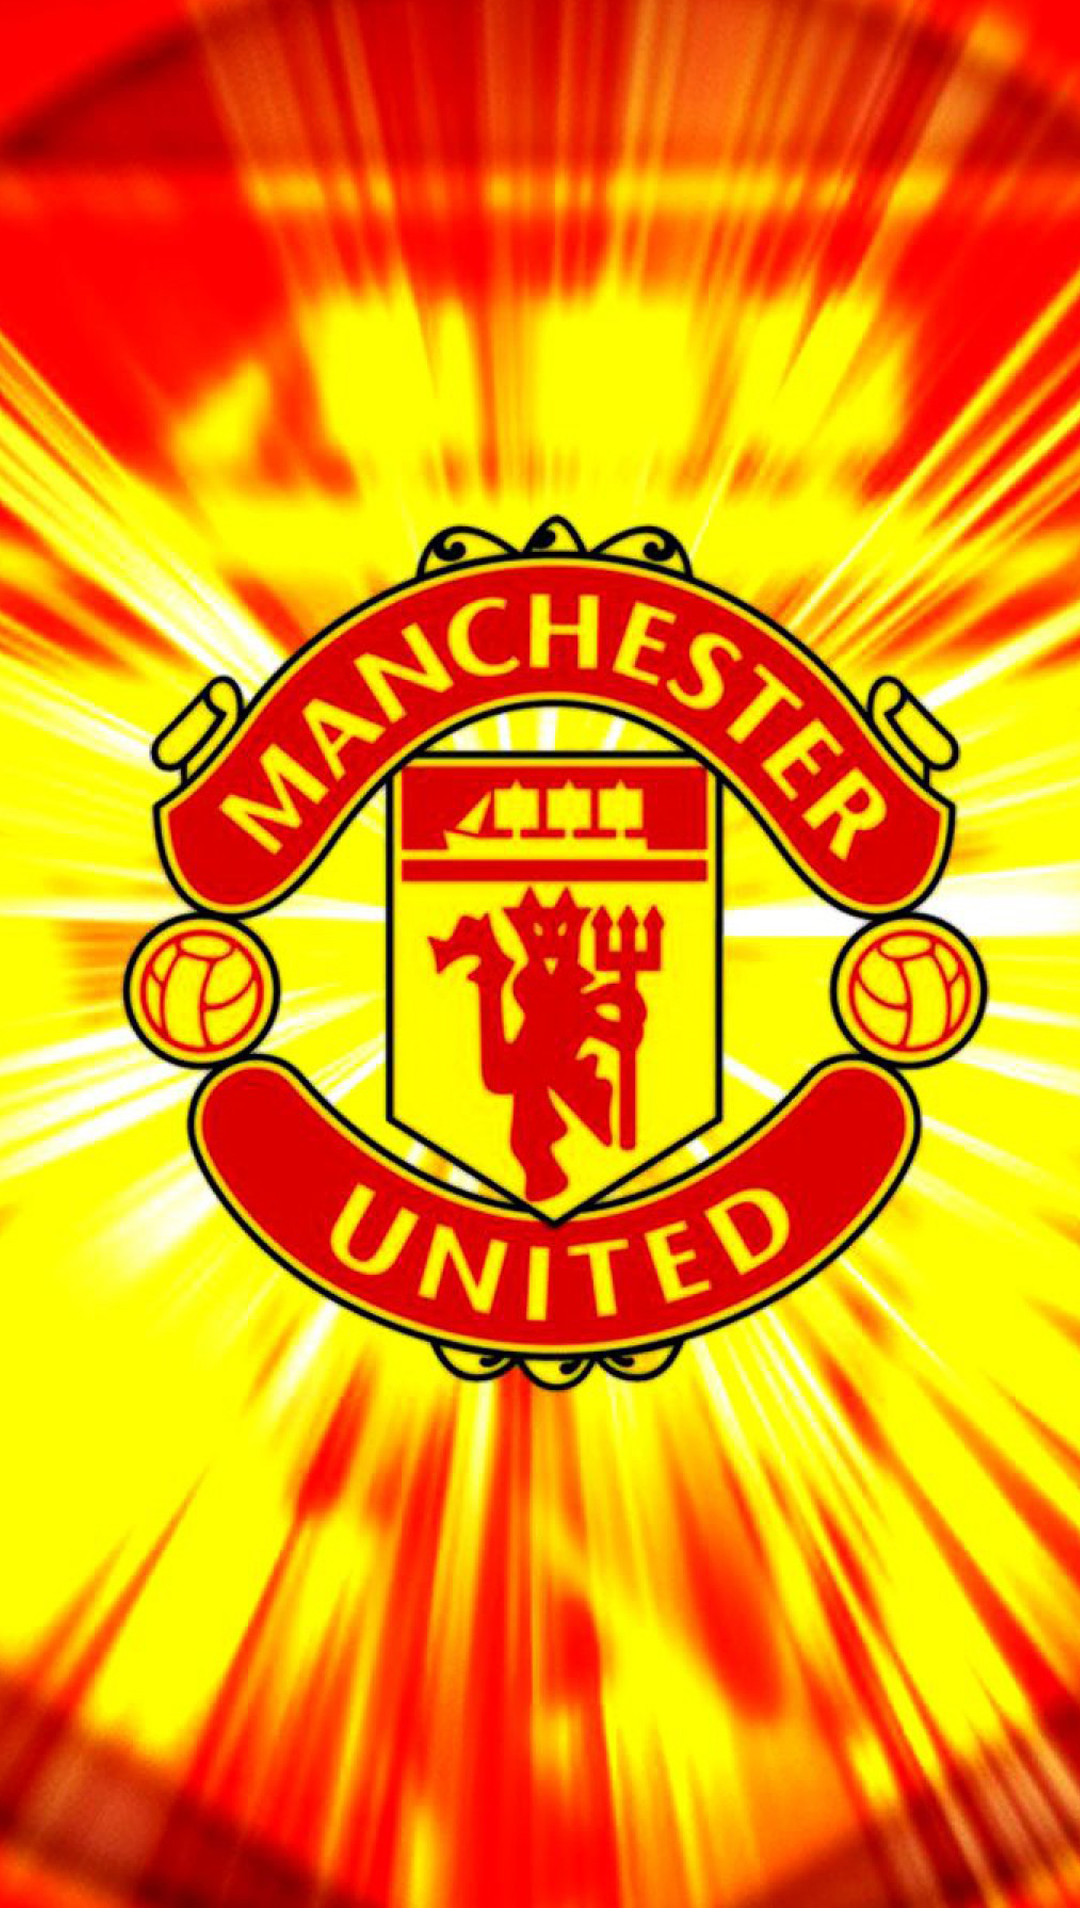 1080x1920 Apple iPhone 6 Plus HD Wallpaper - Manchester United in with red and yellow  background #